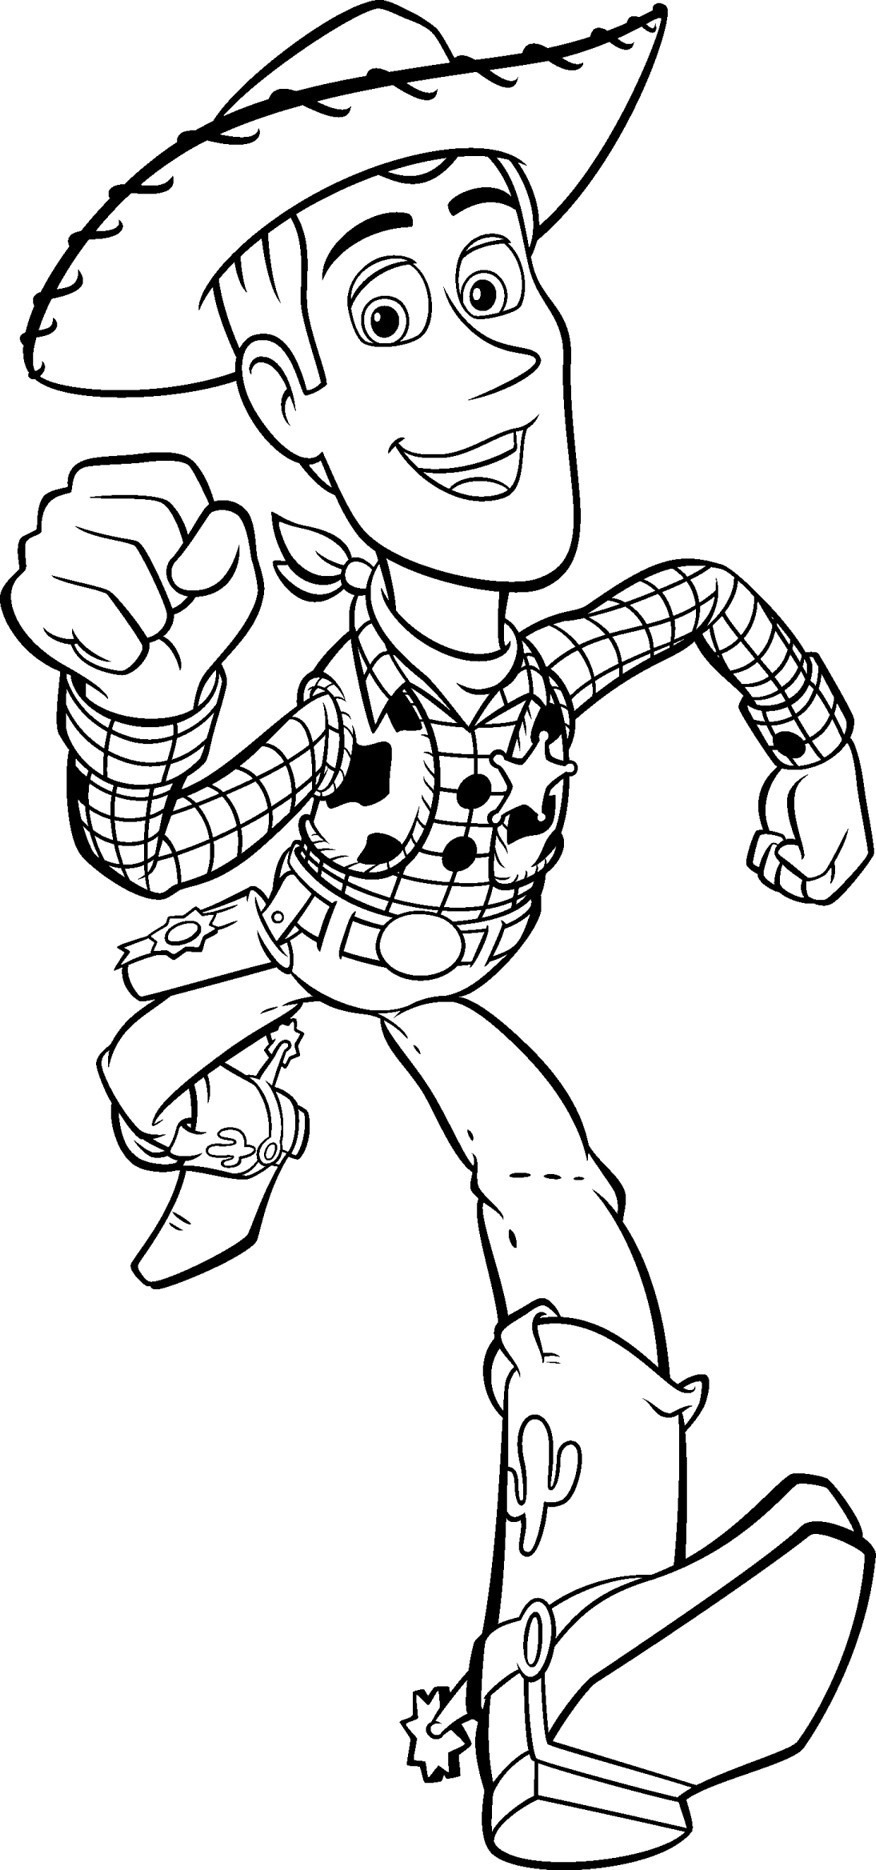 Disney Coloring Books
 Free Printable Toy Story Coloring Pages For Kids